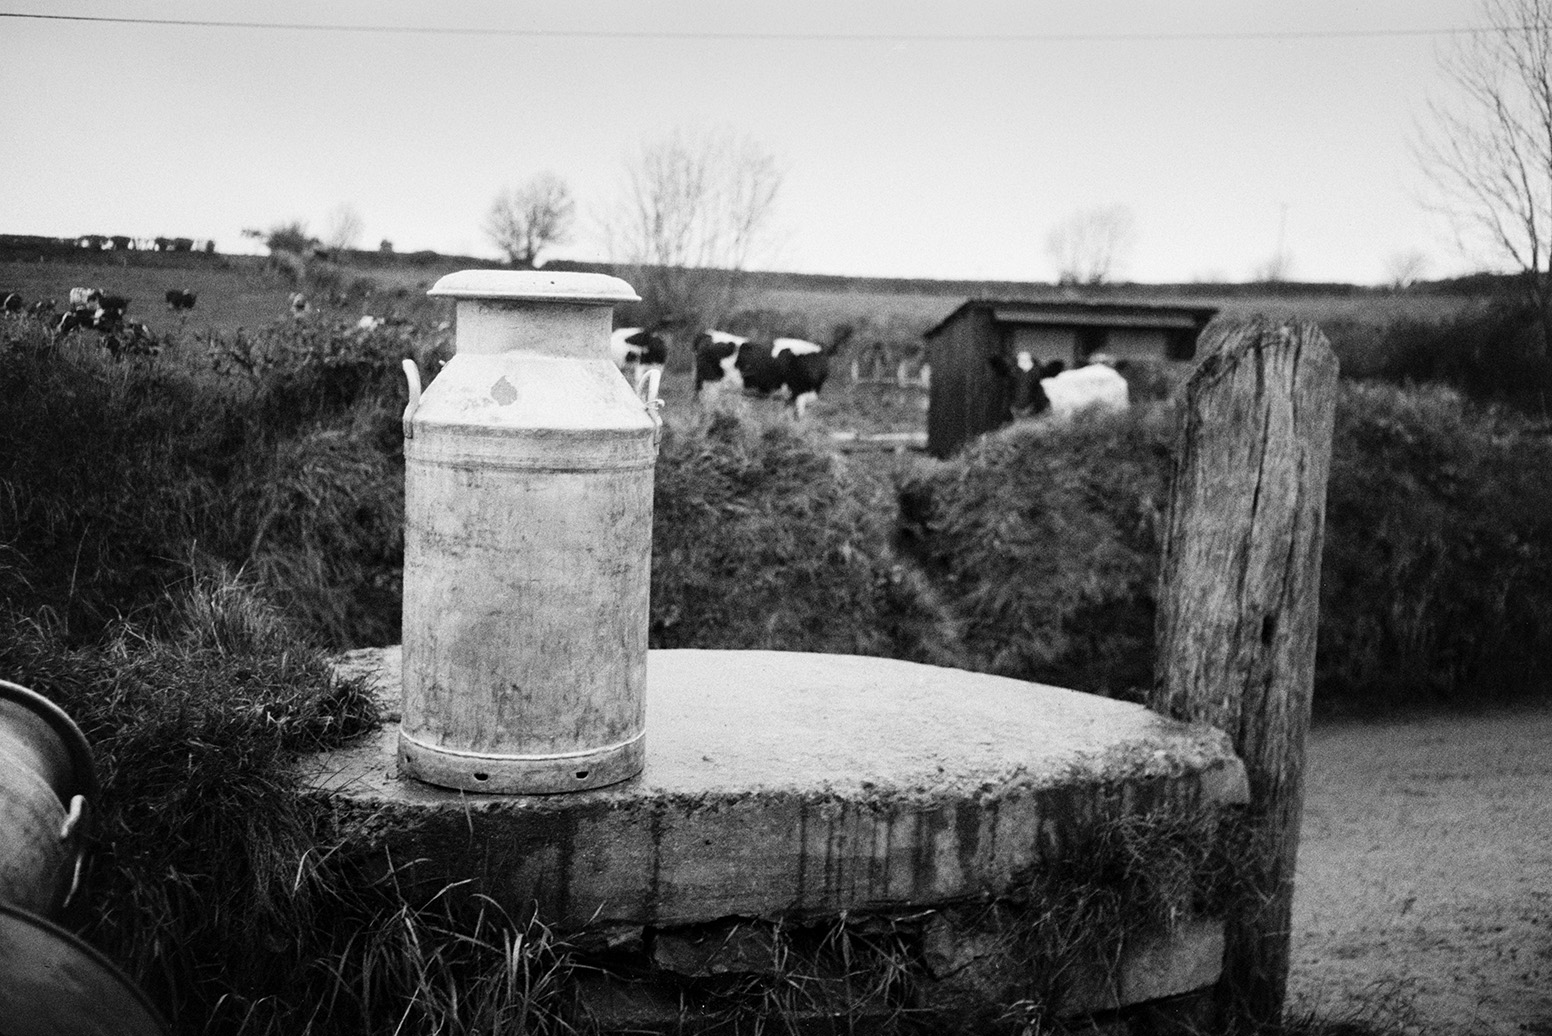 A milk churn on a milk churn stand  by a lane in Beaford. Cows can be seen grazing in the background.